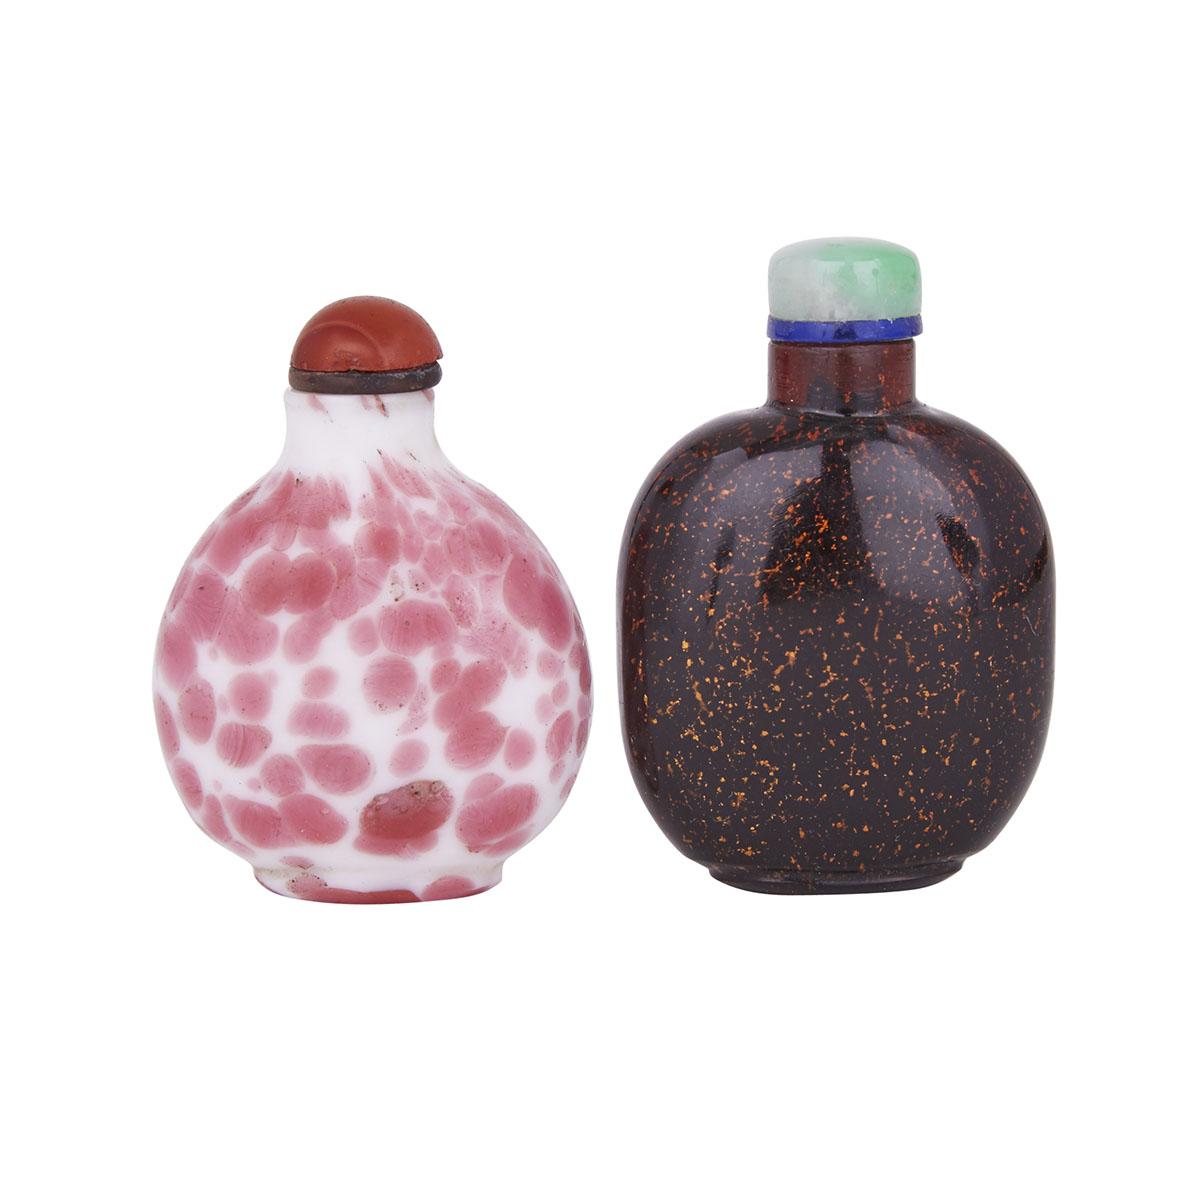 TWO PEKING GLASS SNUFF BOTTLES, 19TH CENTURY 清十九世紀 京料鼻煙壺兩件 One of deep brown glass with an